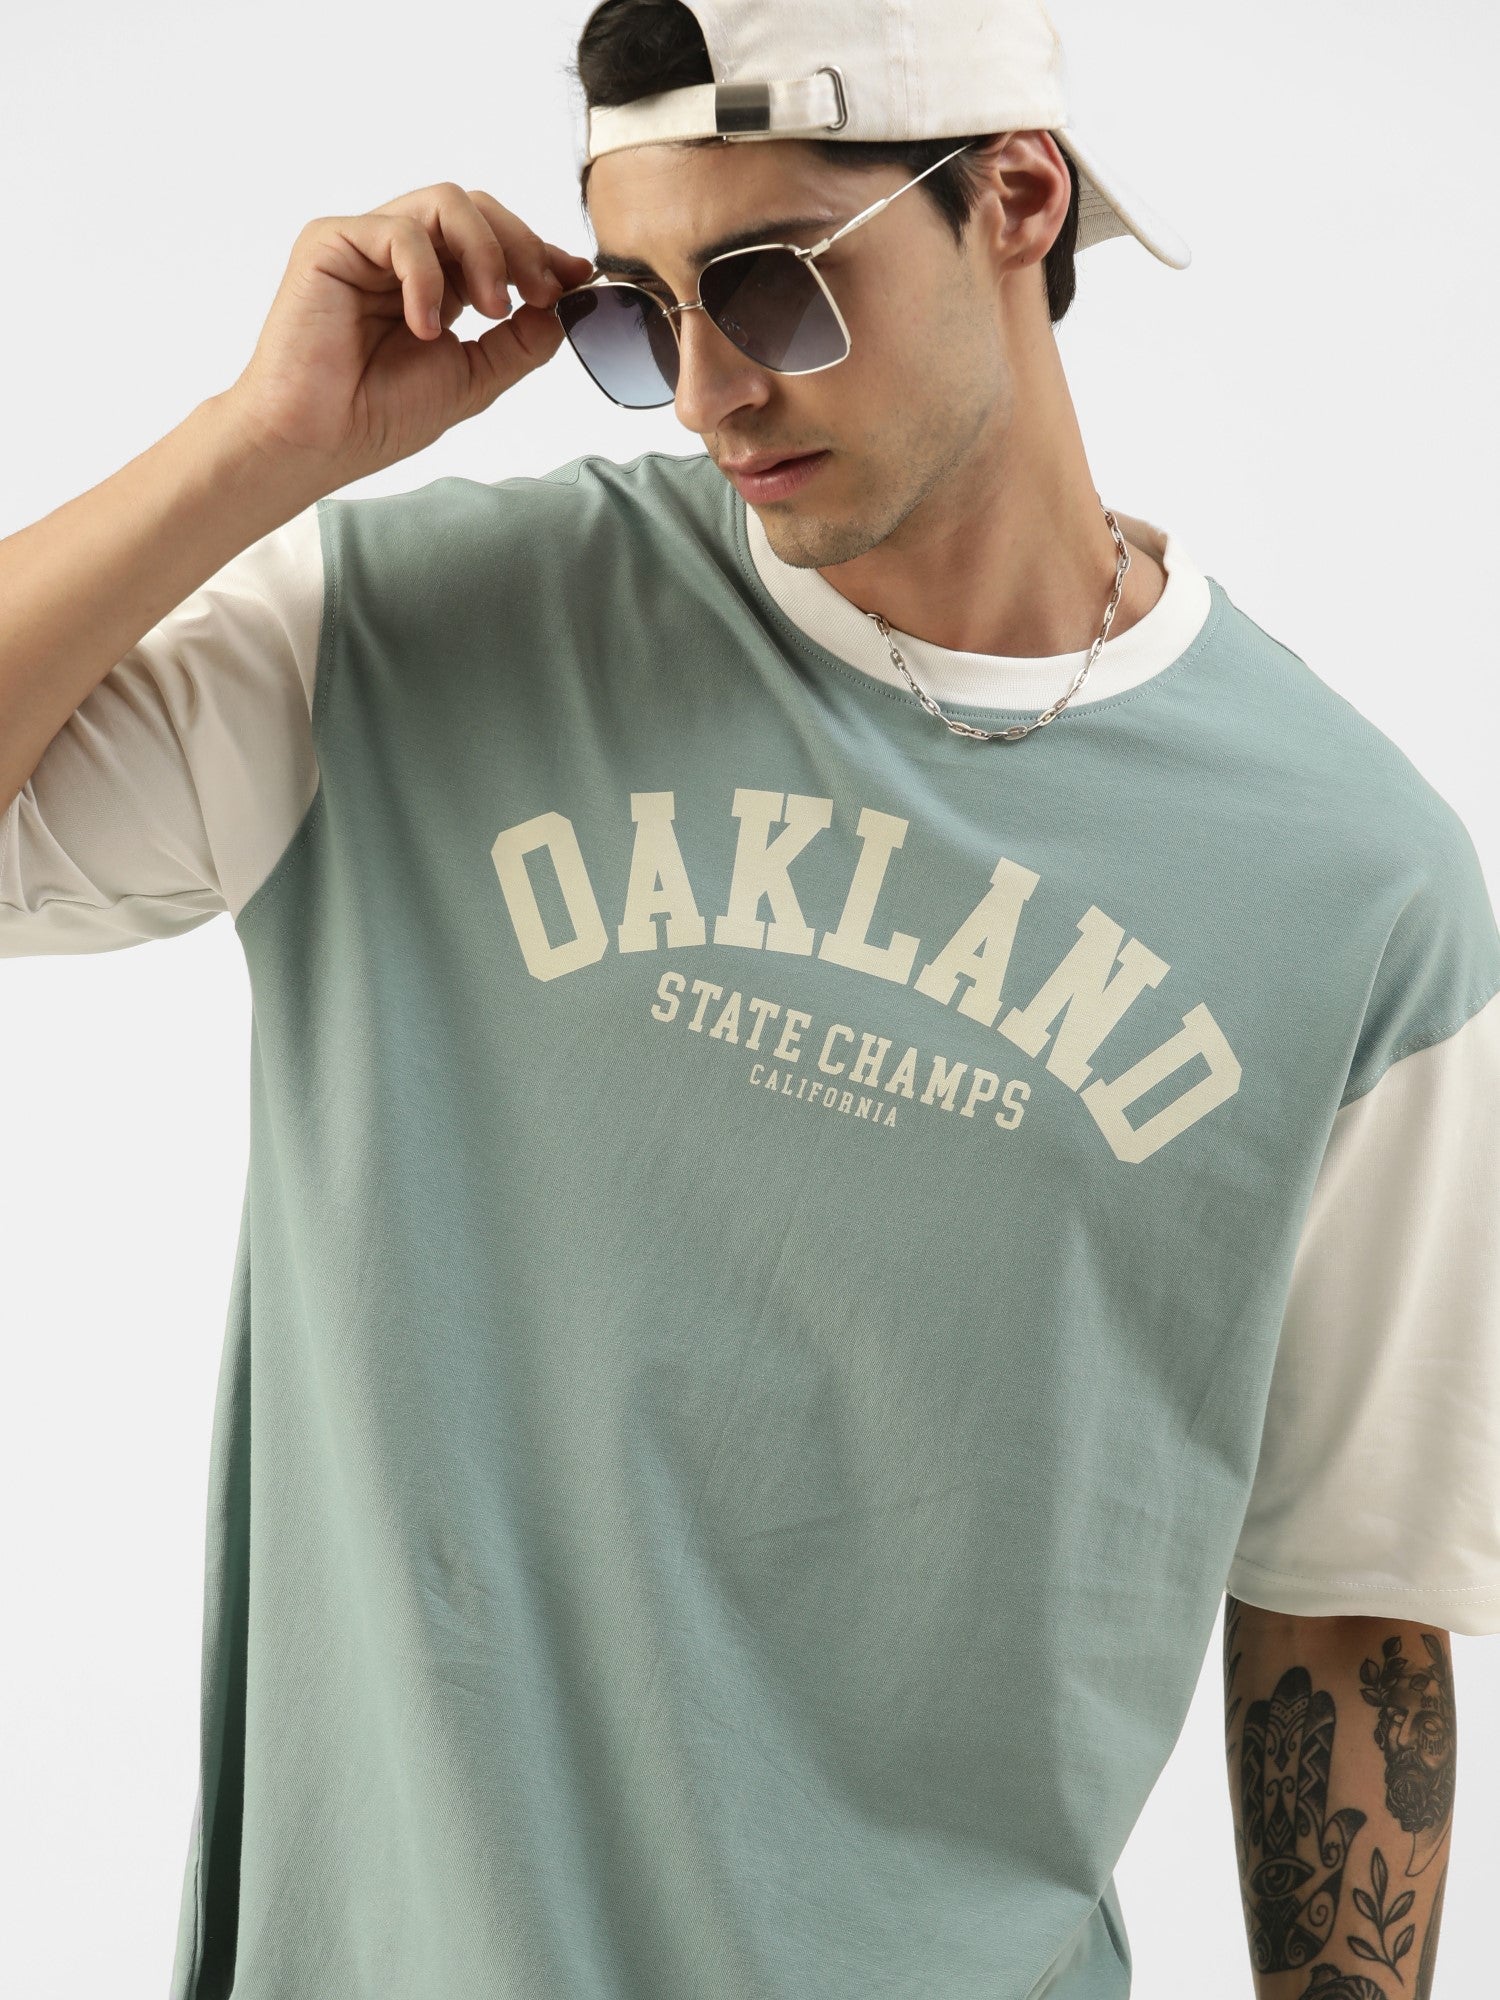 Oakland's Own Welcome to The Jungle - Oakland T-Shirt